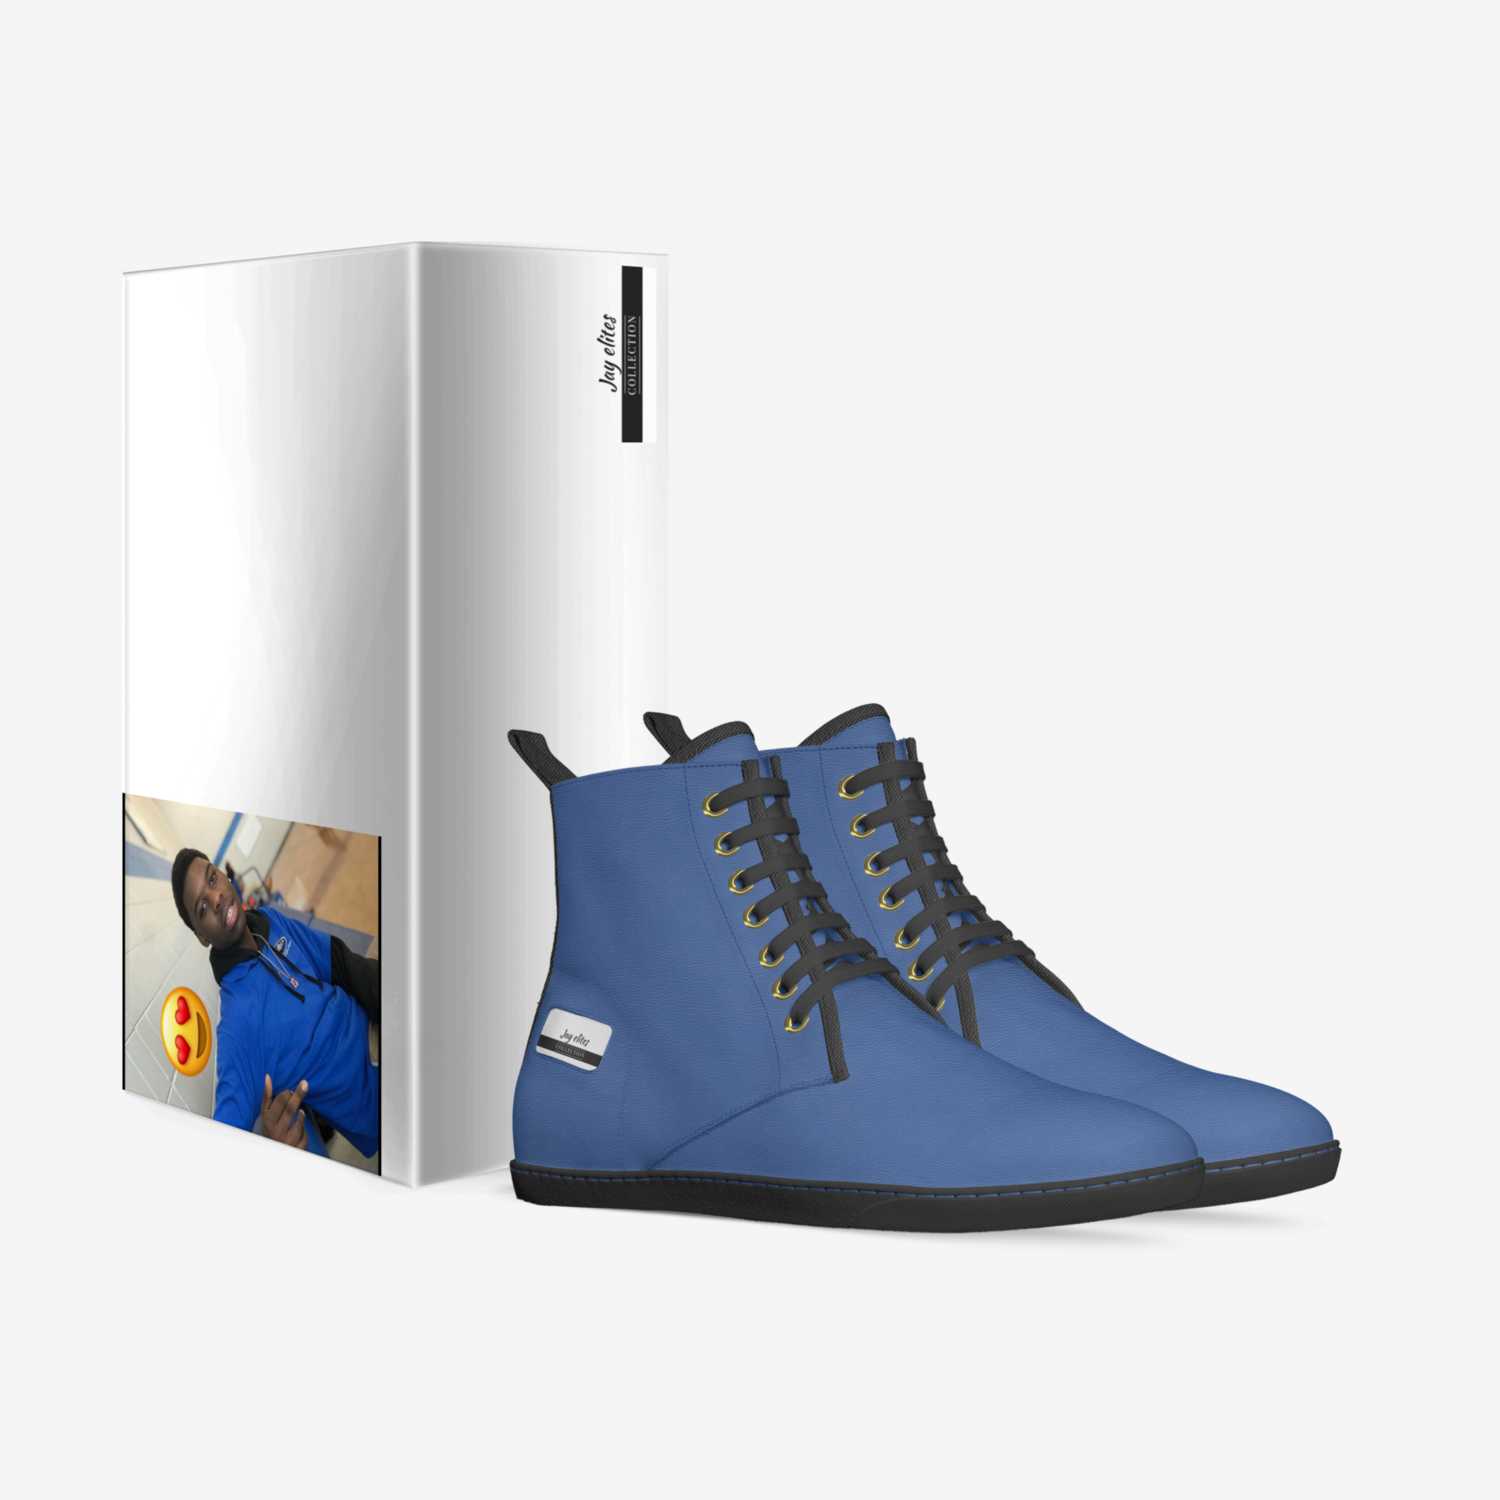 Jay elites custom made in Italy shoes by Jalen | Box view